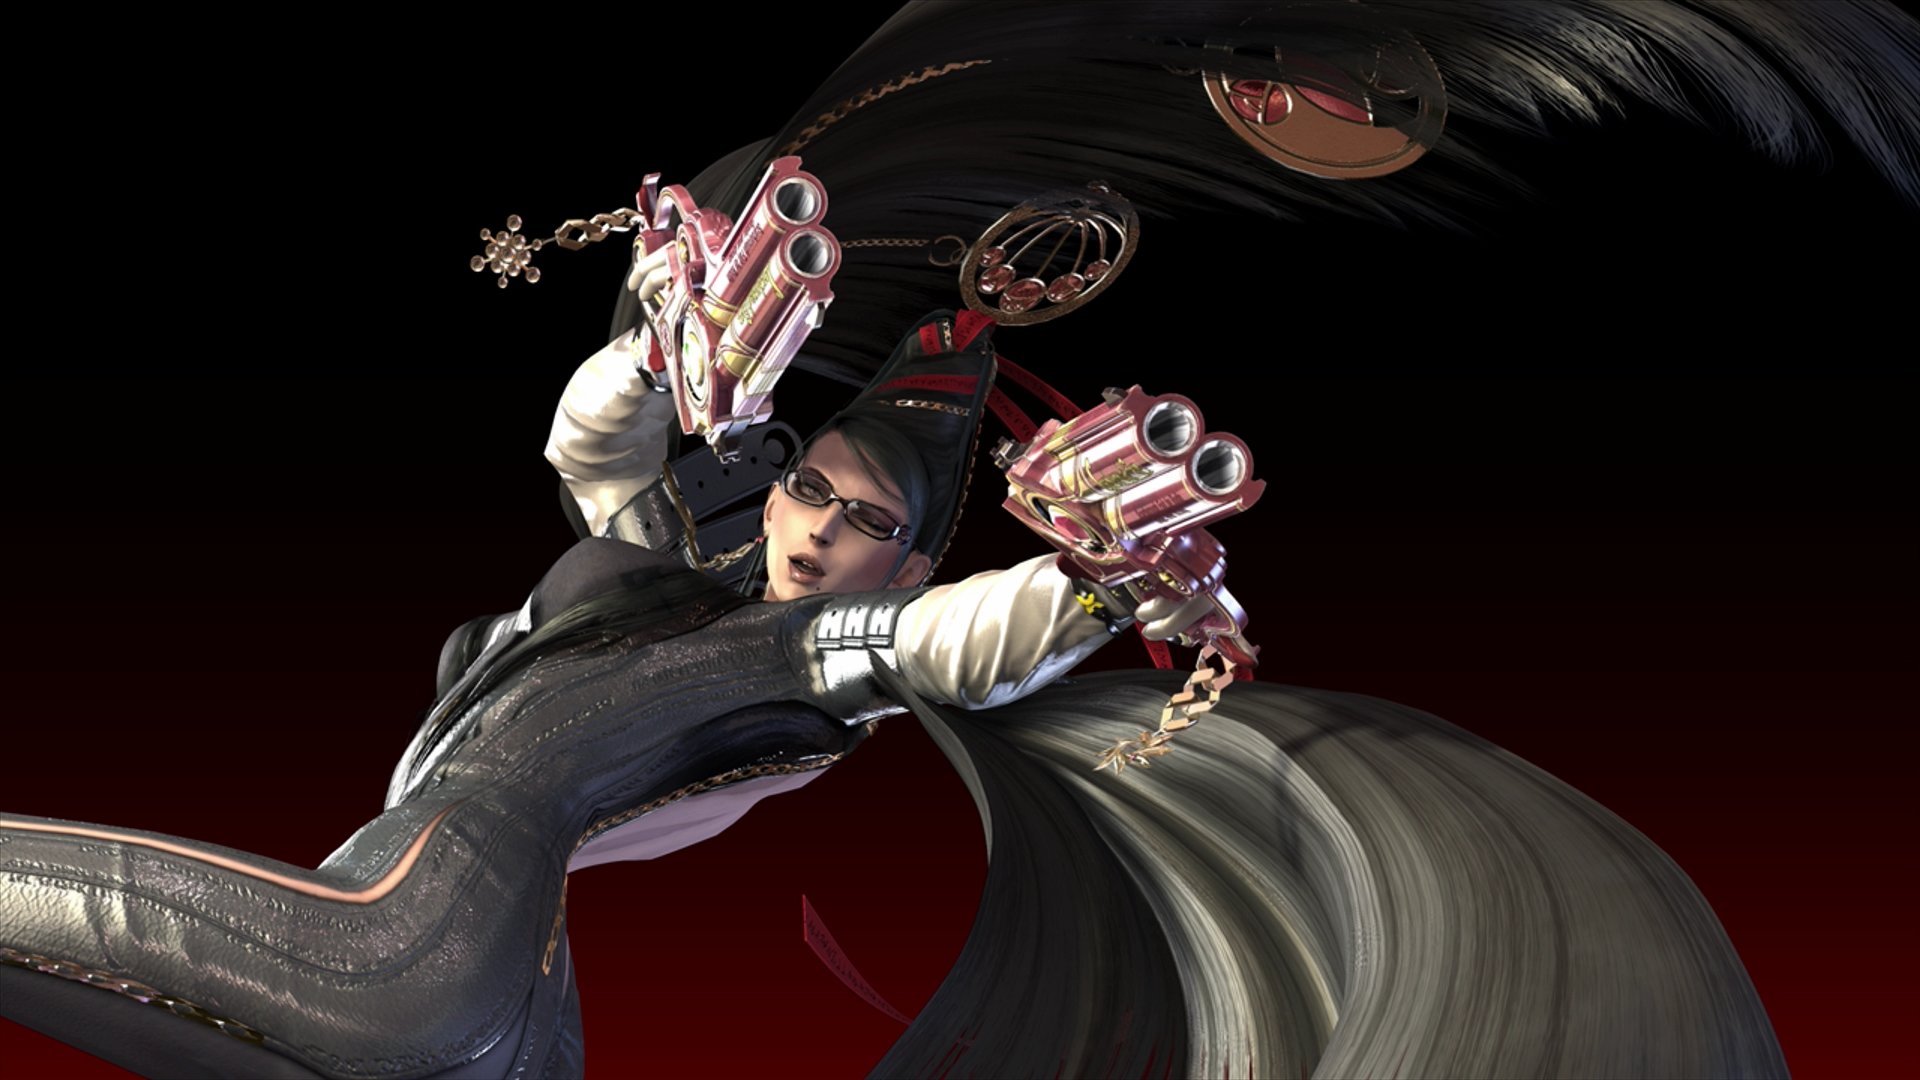 Download 1080p Bayonetta PC background ID:100249 for free